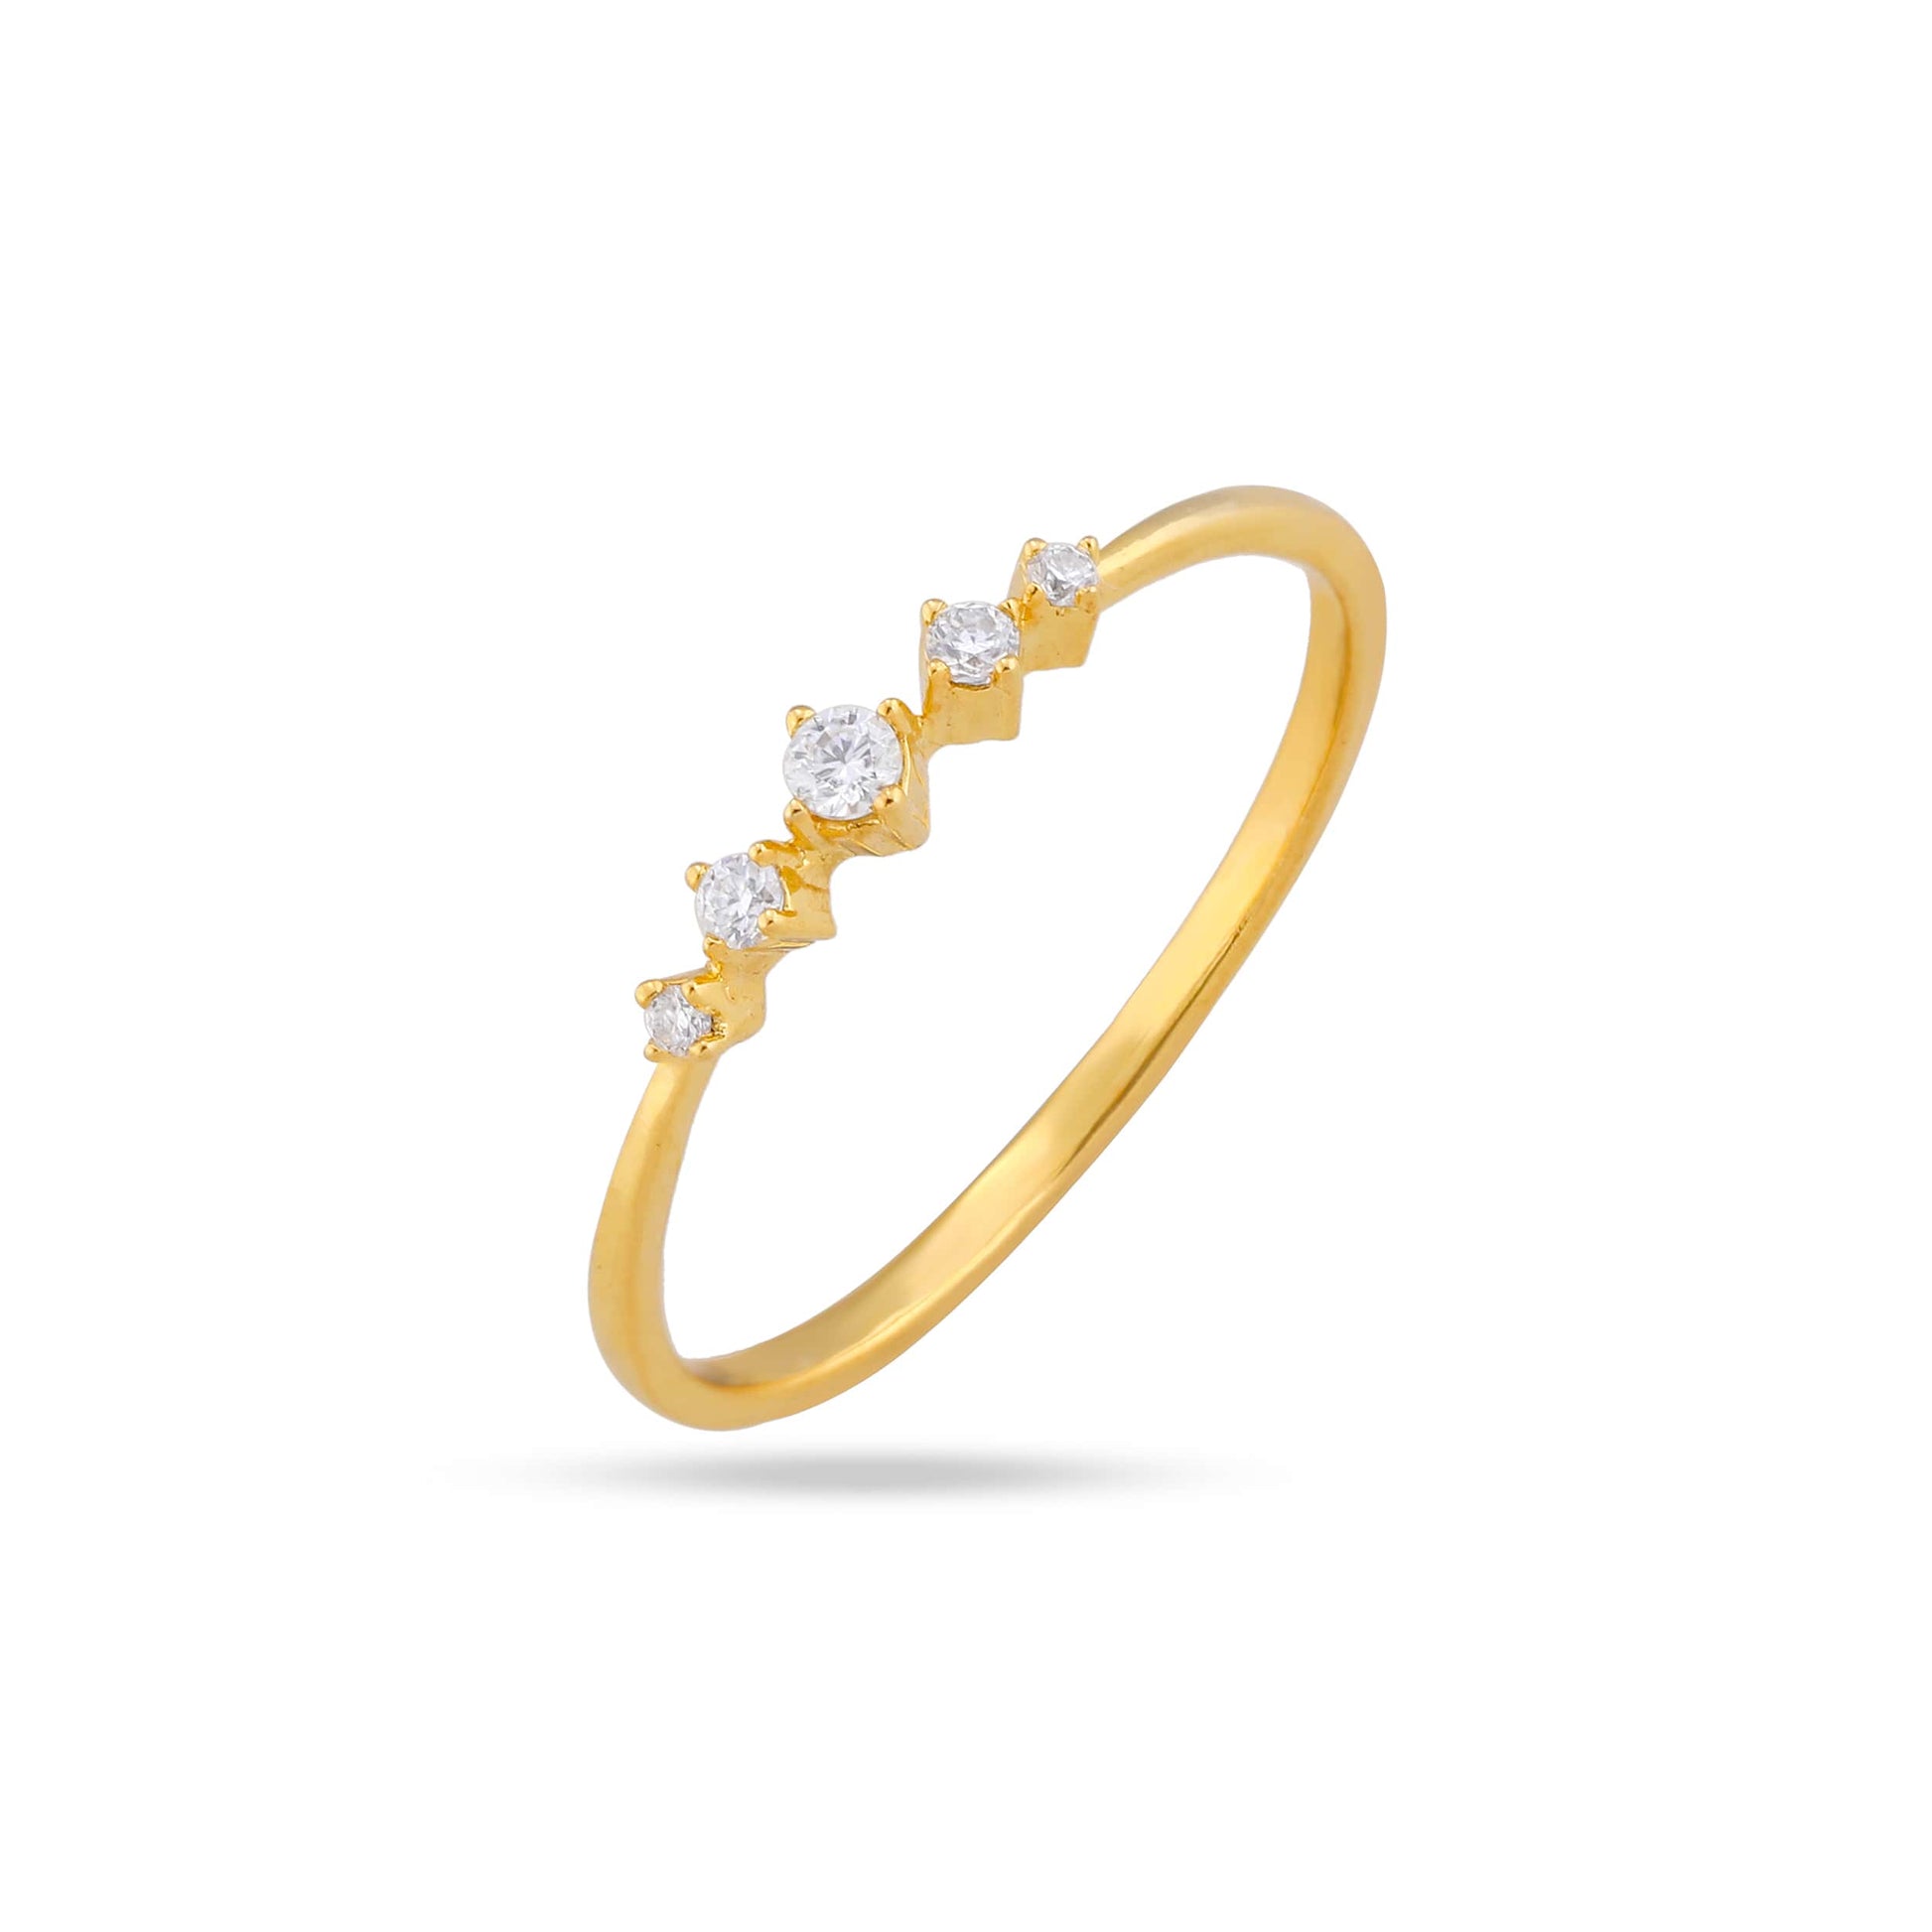 Delicate 14K Gold Moissanite Ring in yellow gold